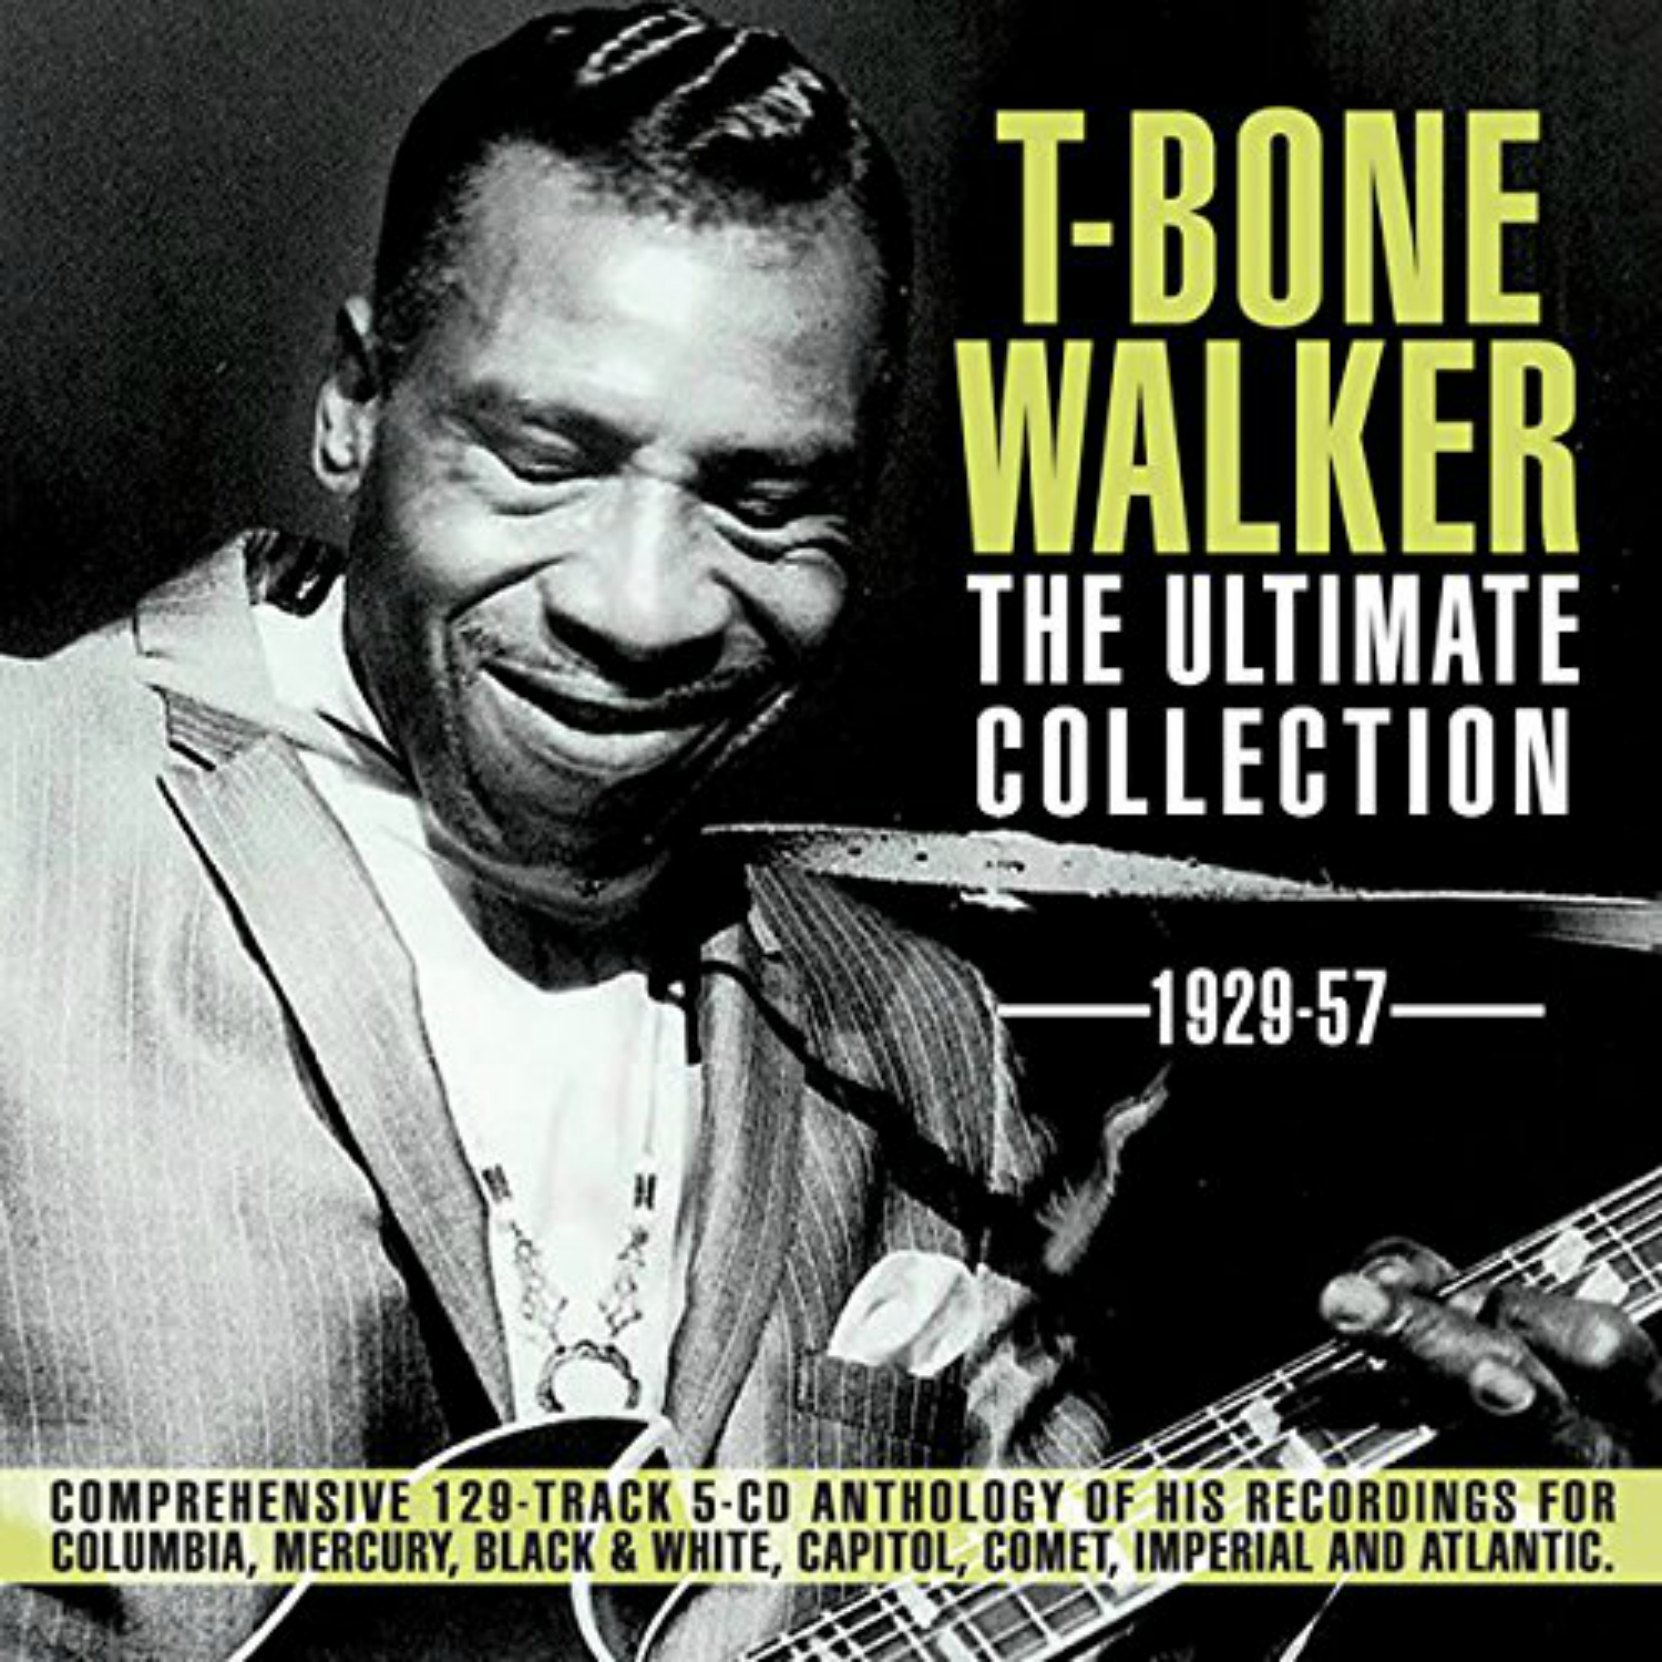 CD cover, T-Bone Walker, The Ultimate Collection 1929-57, on Acrobat Records